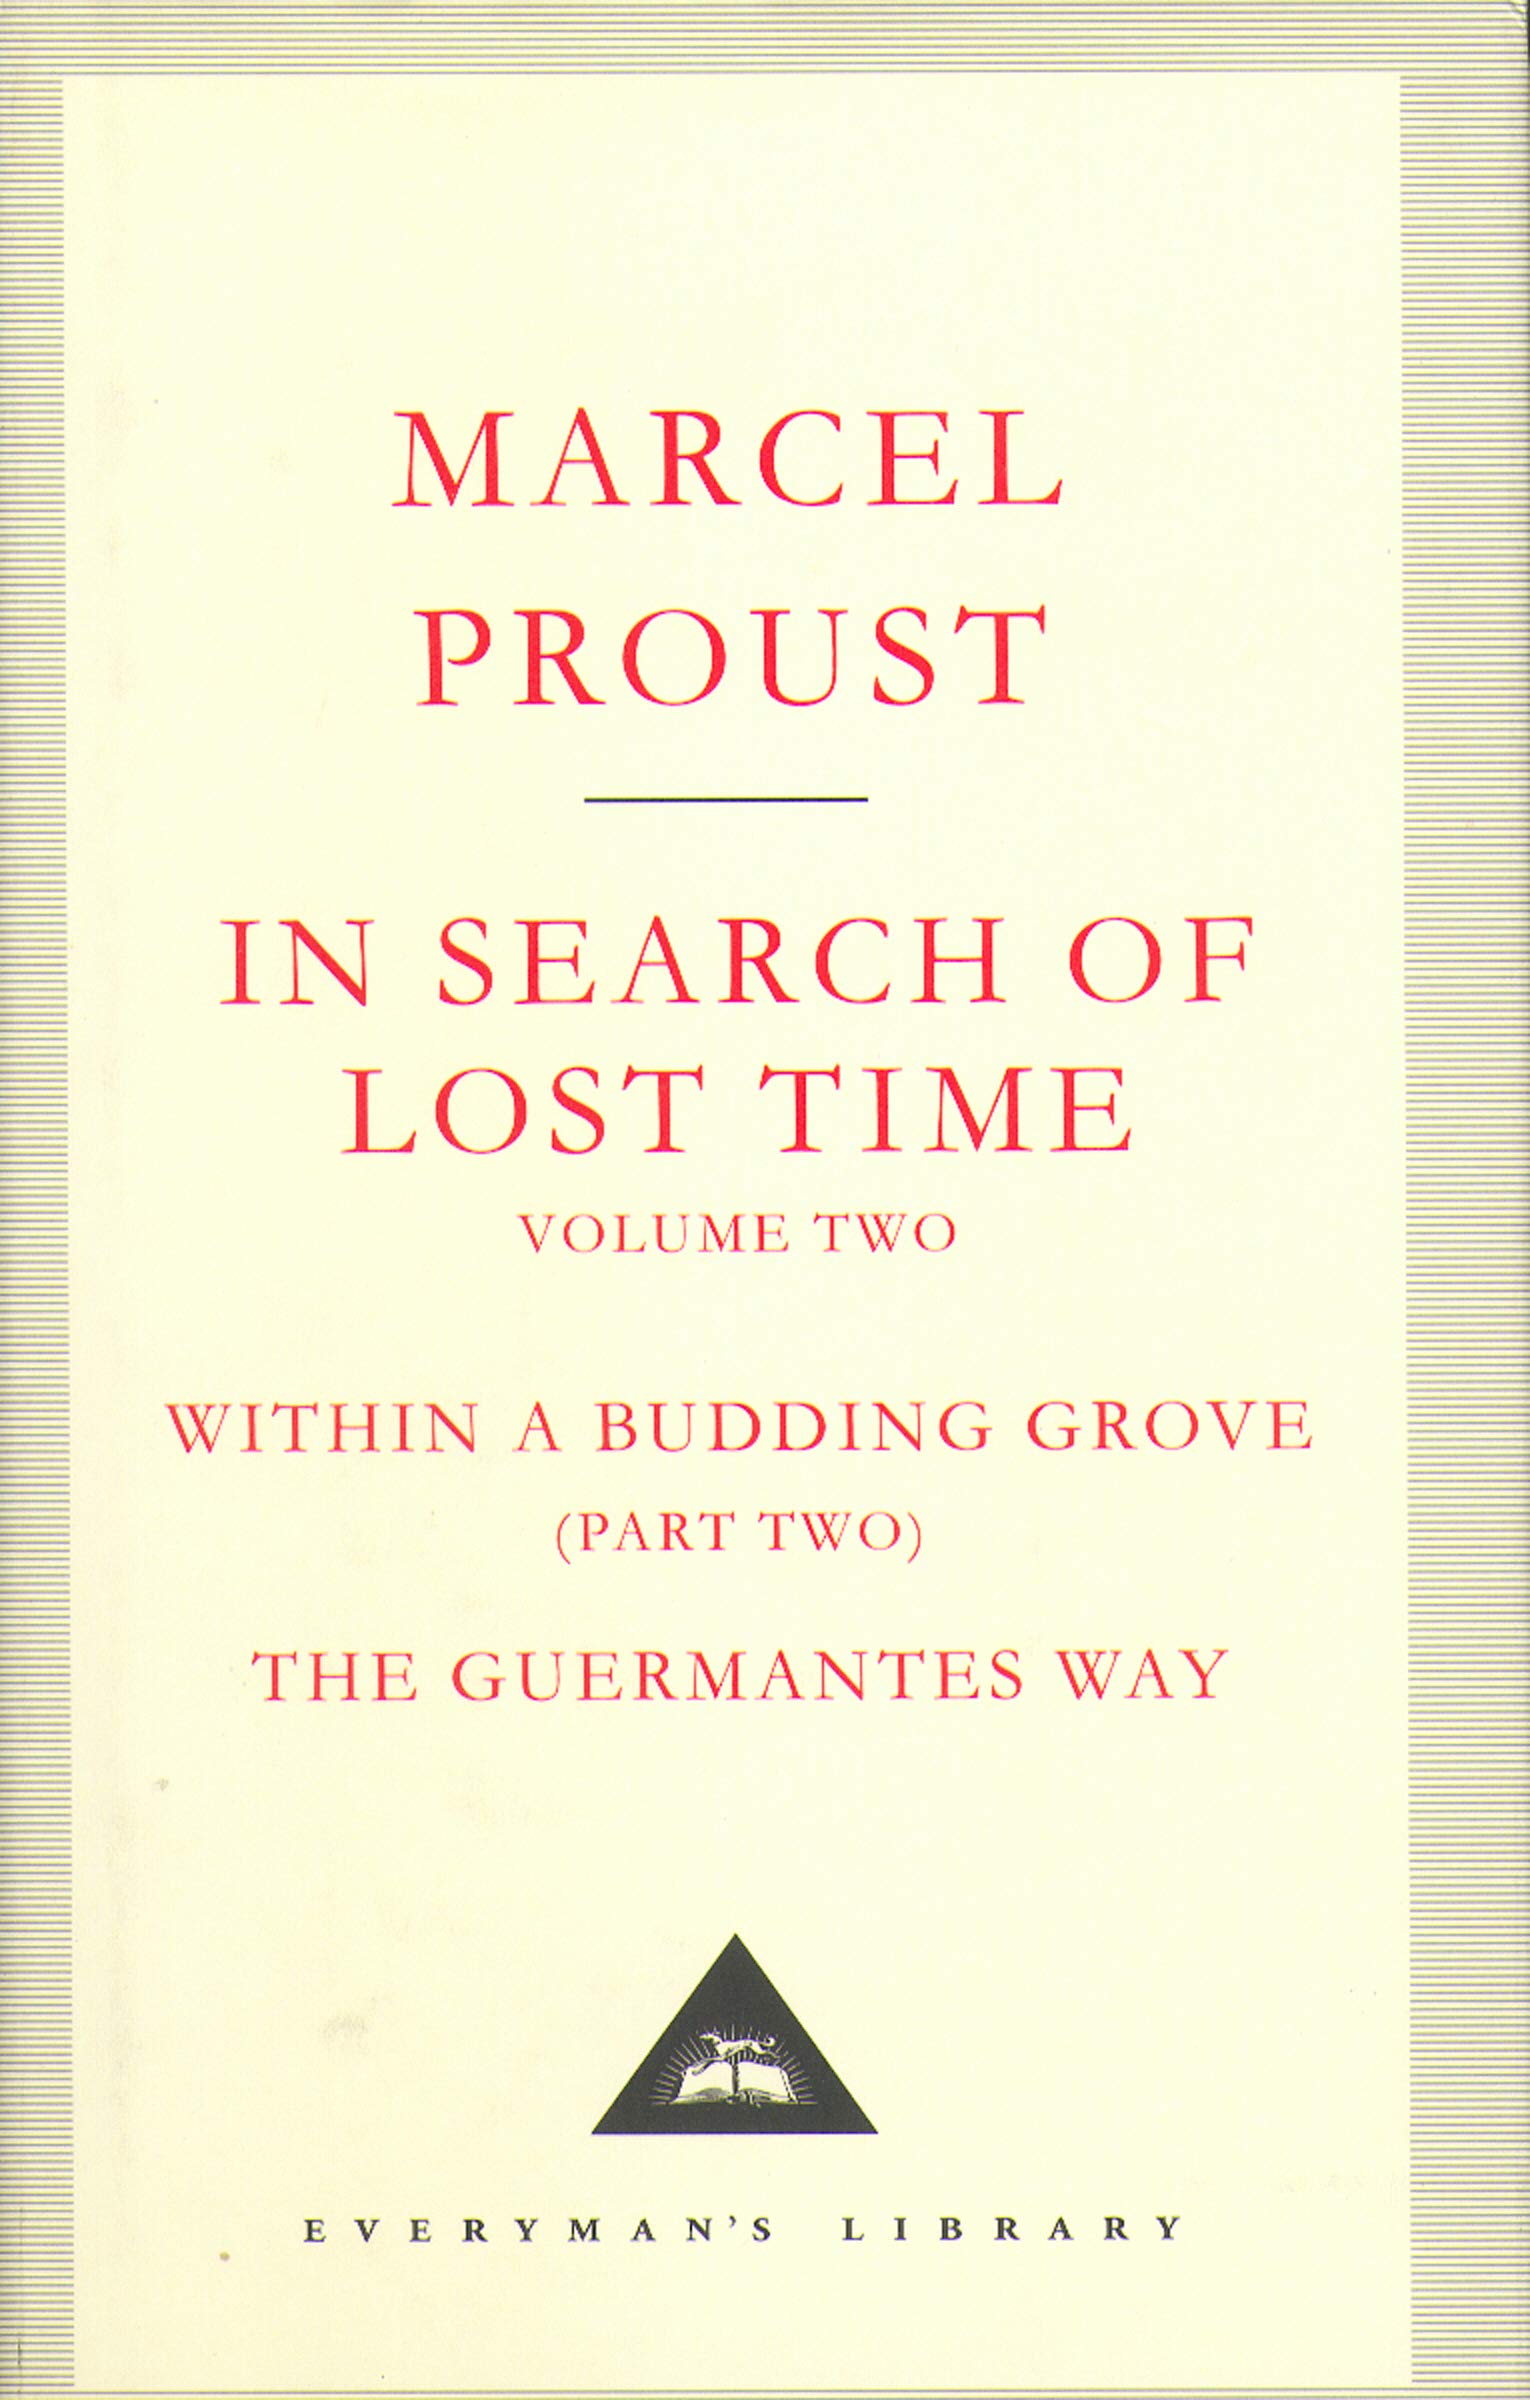 proust the guermantes way